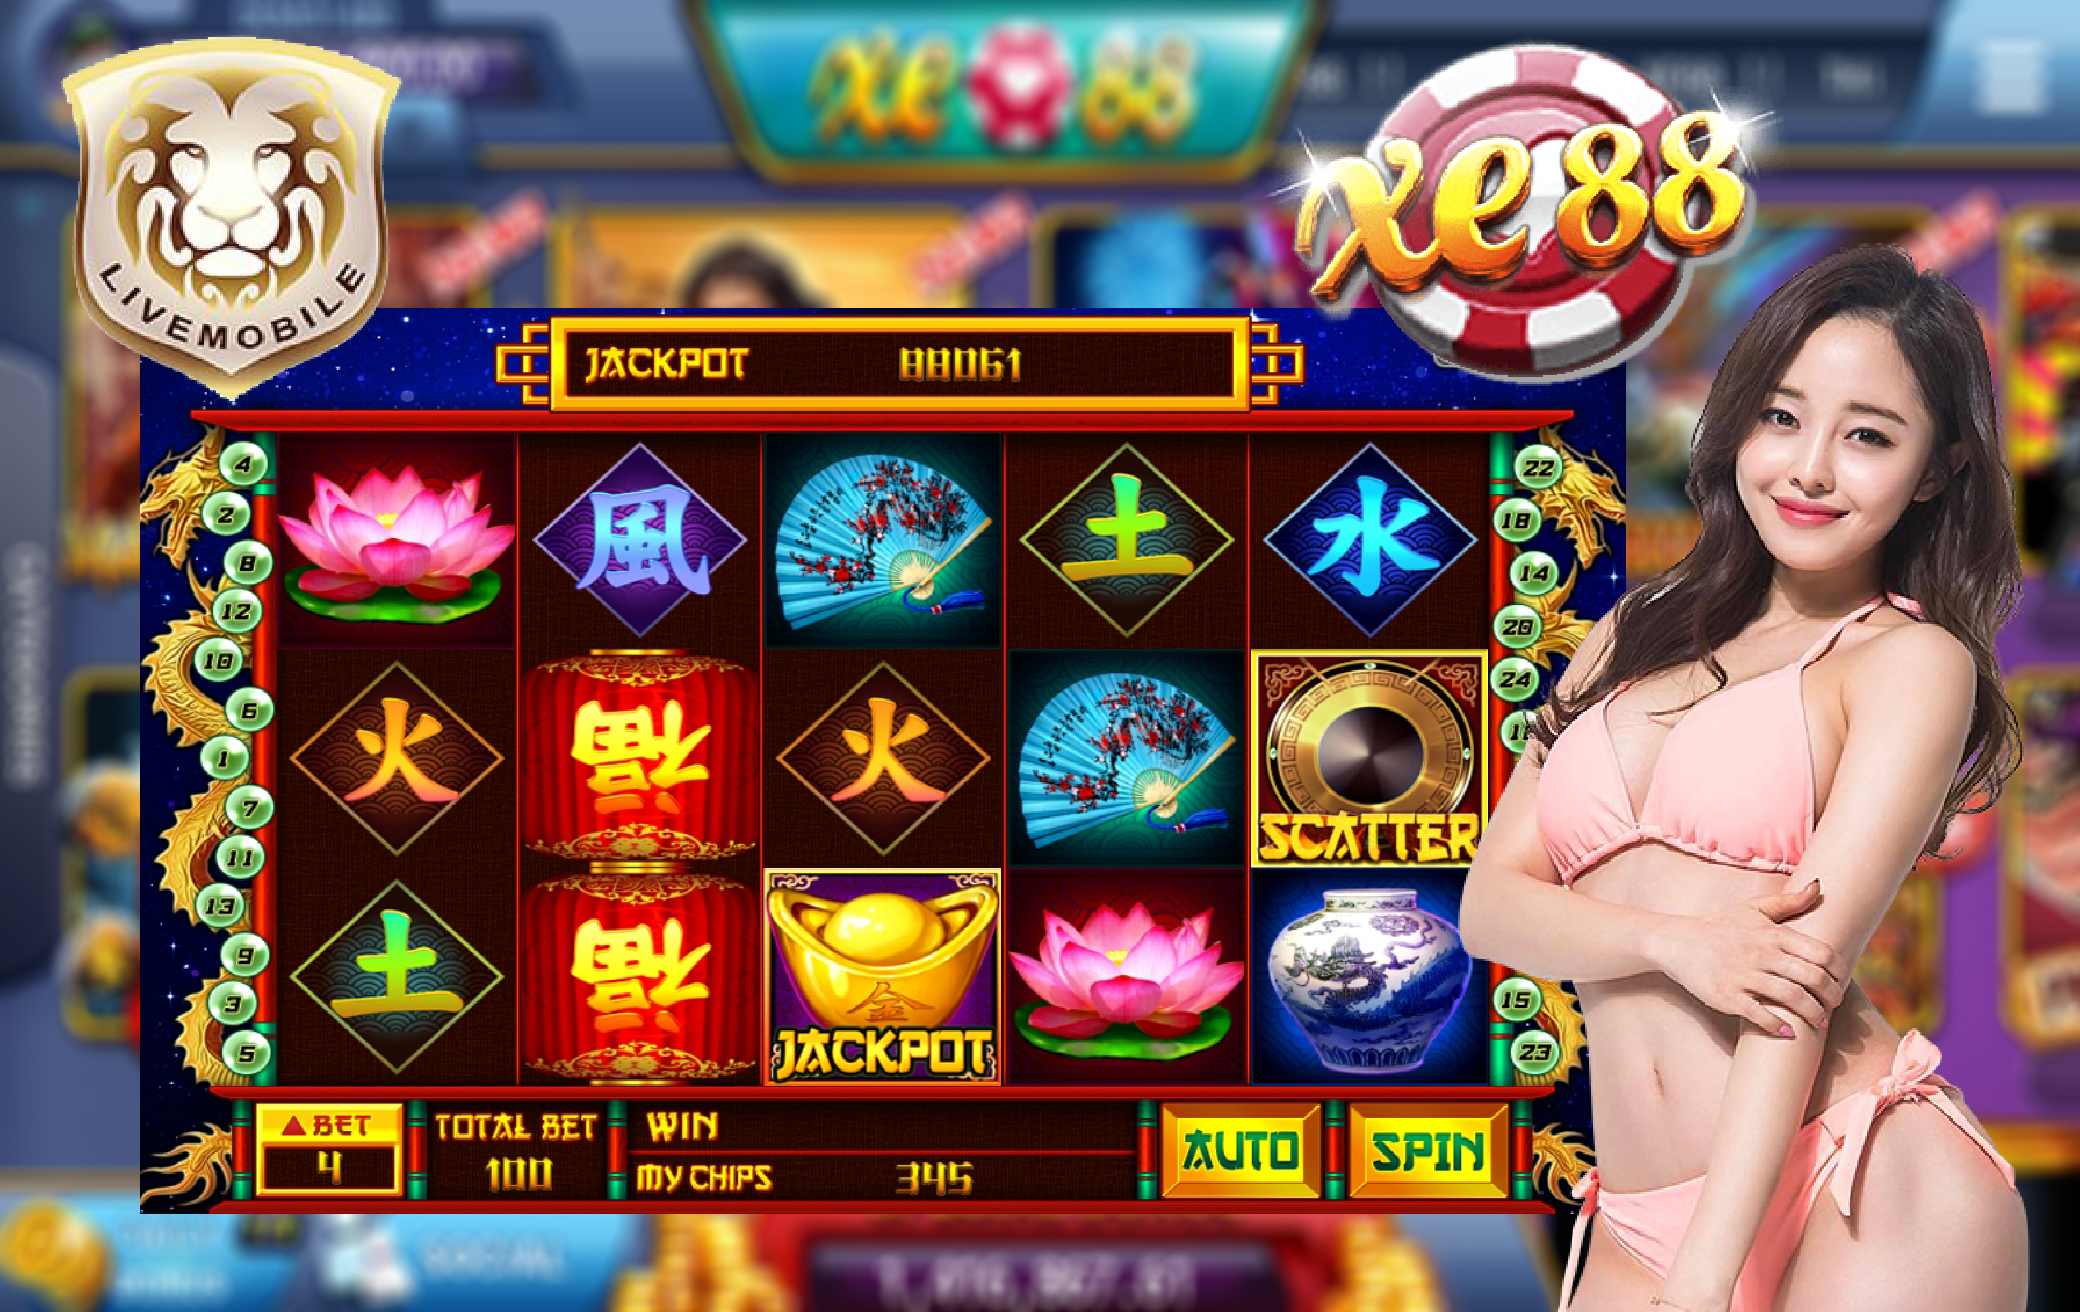 Download game xe88